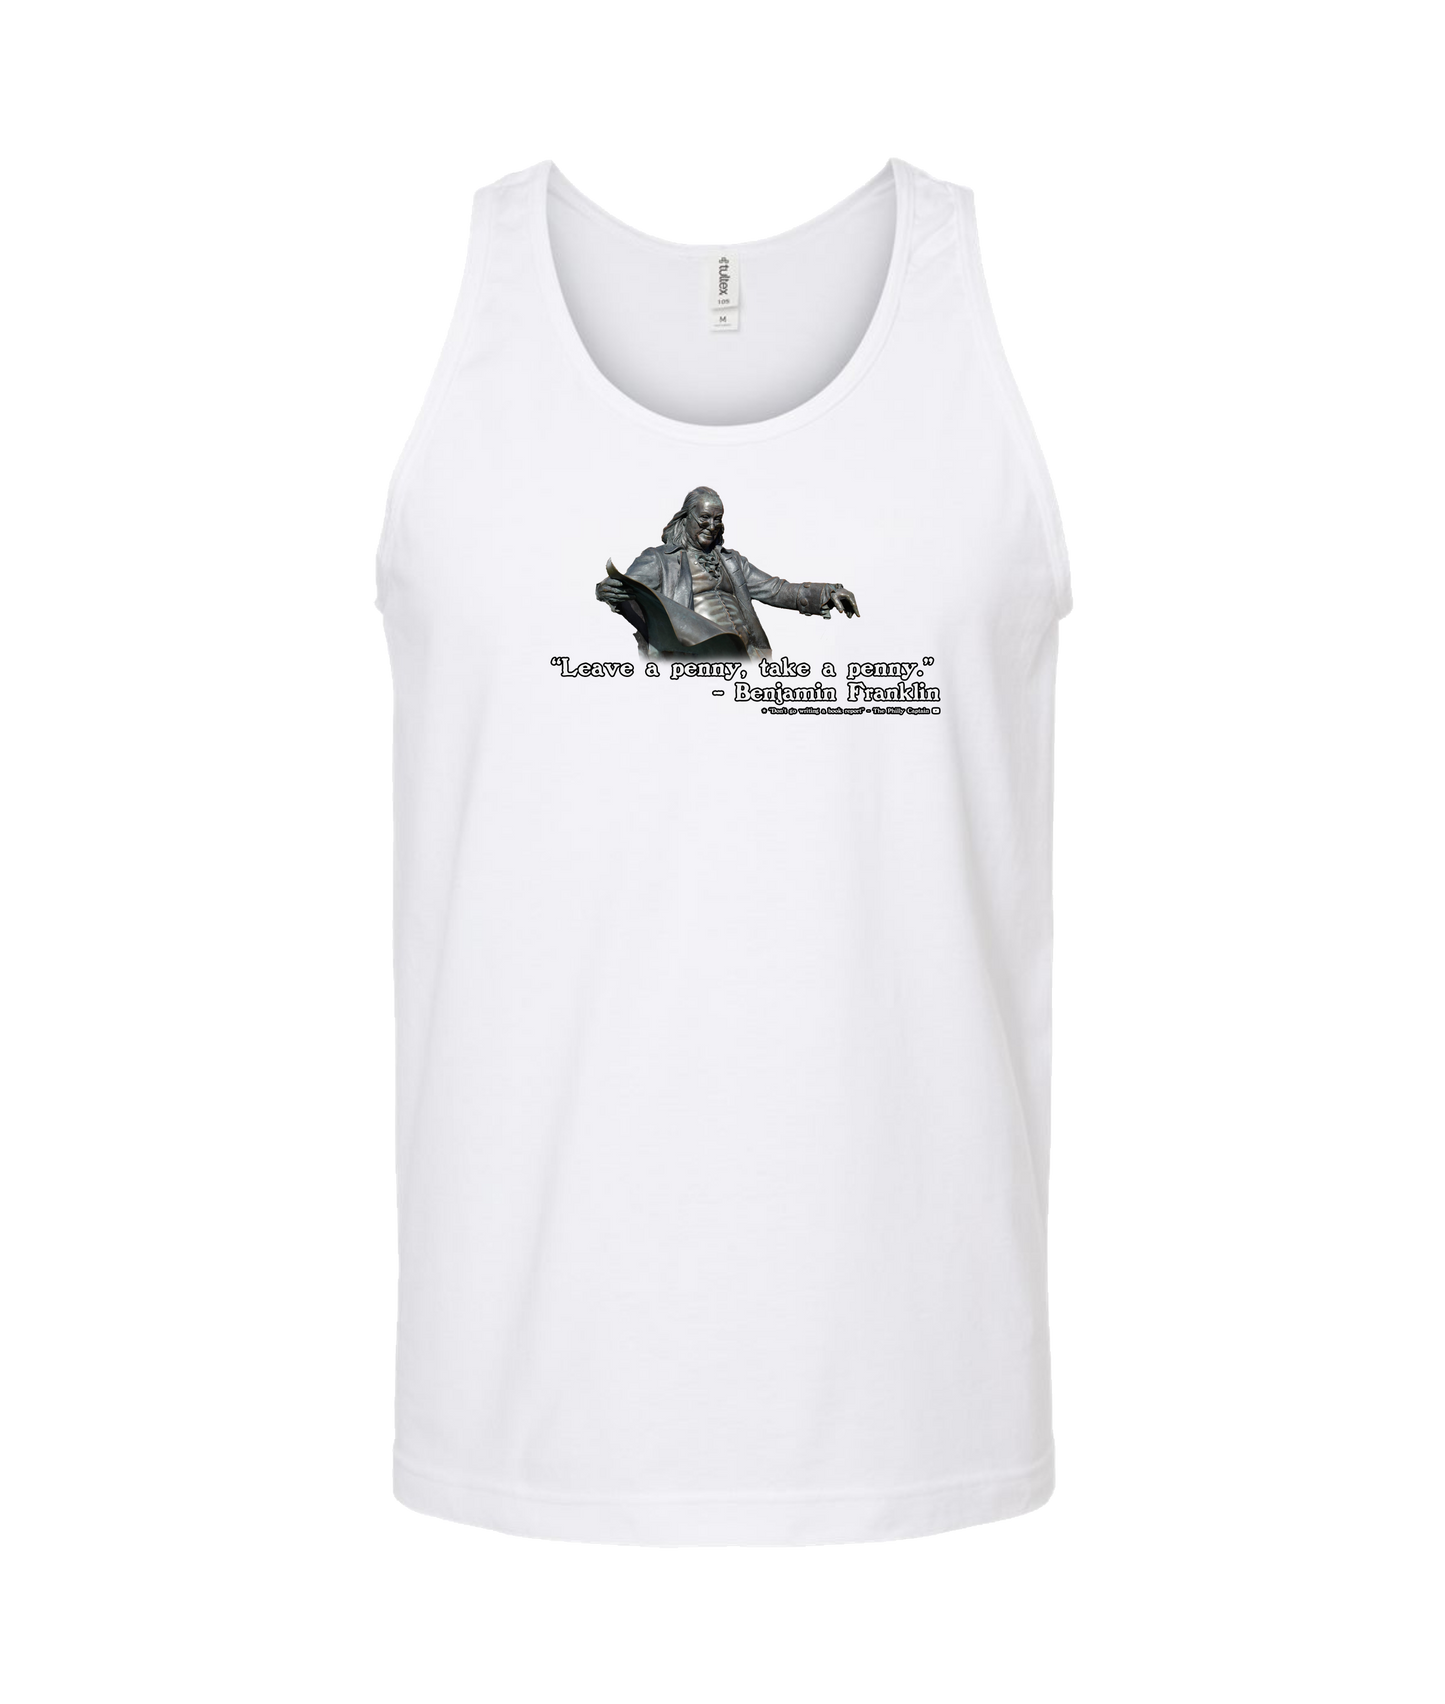 The Philly Captain's Merch is Fire - Leave a penny, take a penny - White Tank Top